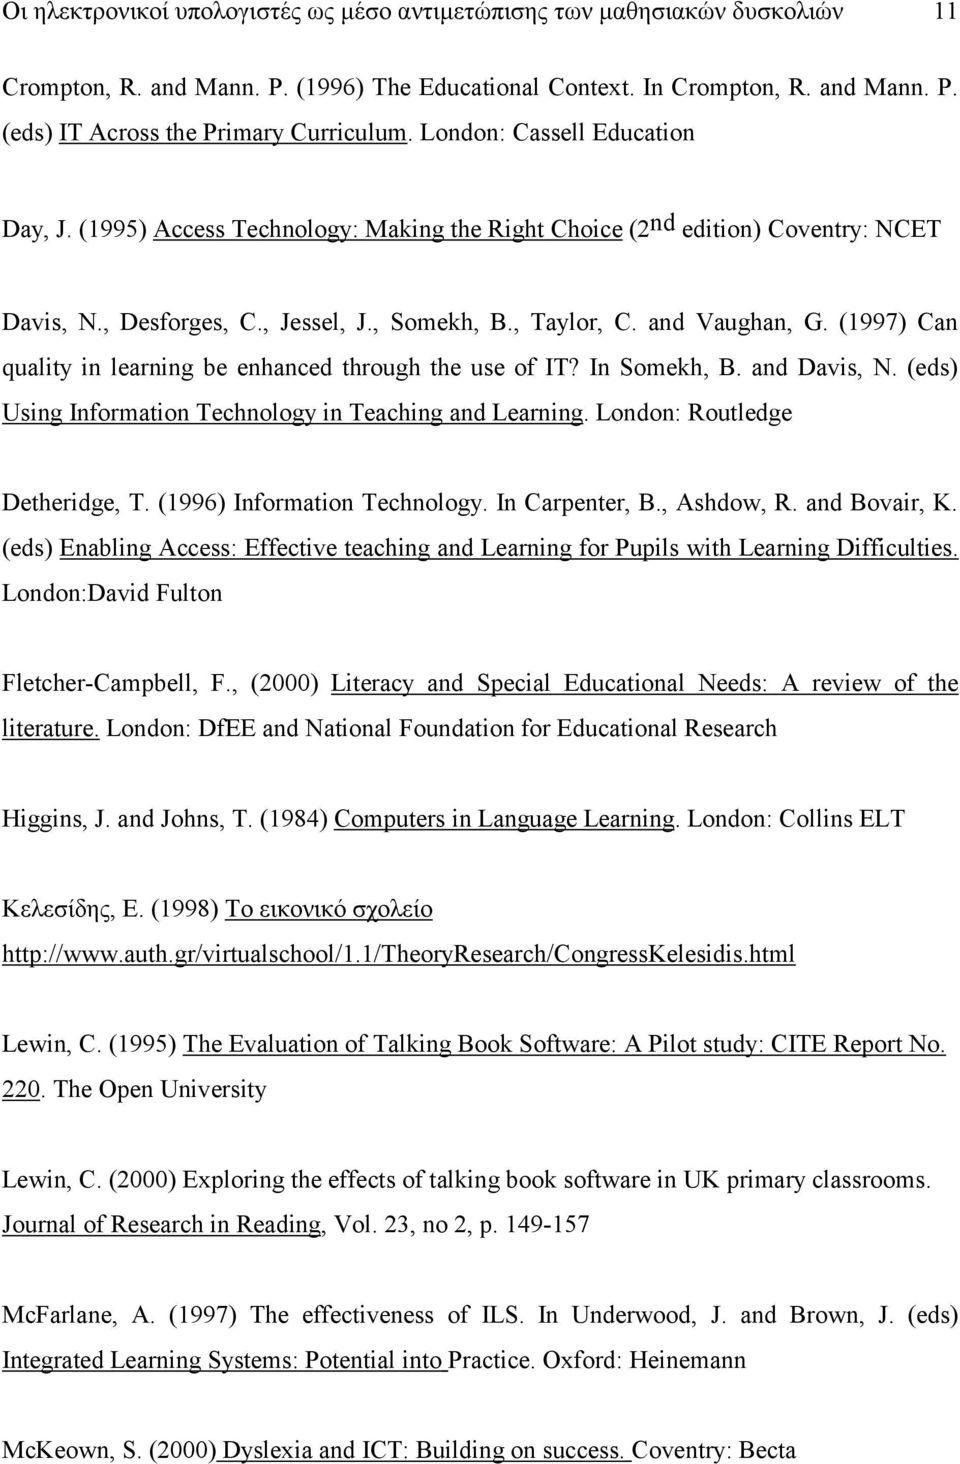 (1997) Can quality in learning be enhanced through the use of IT? In Somekh, B. and Davis, N. (eds) Using Information Technology in Teaching and Learning. London: Routledge Detheridge, T.